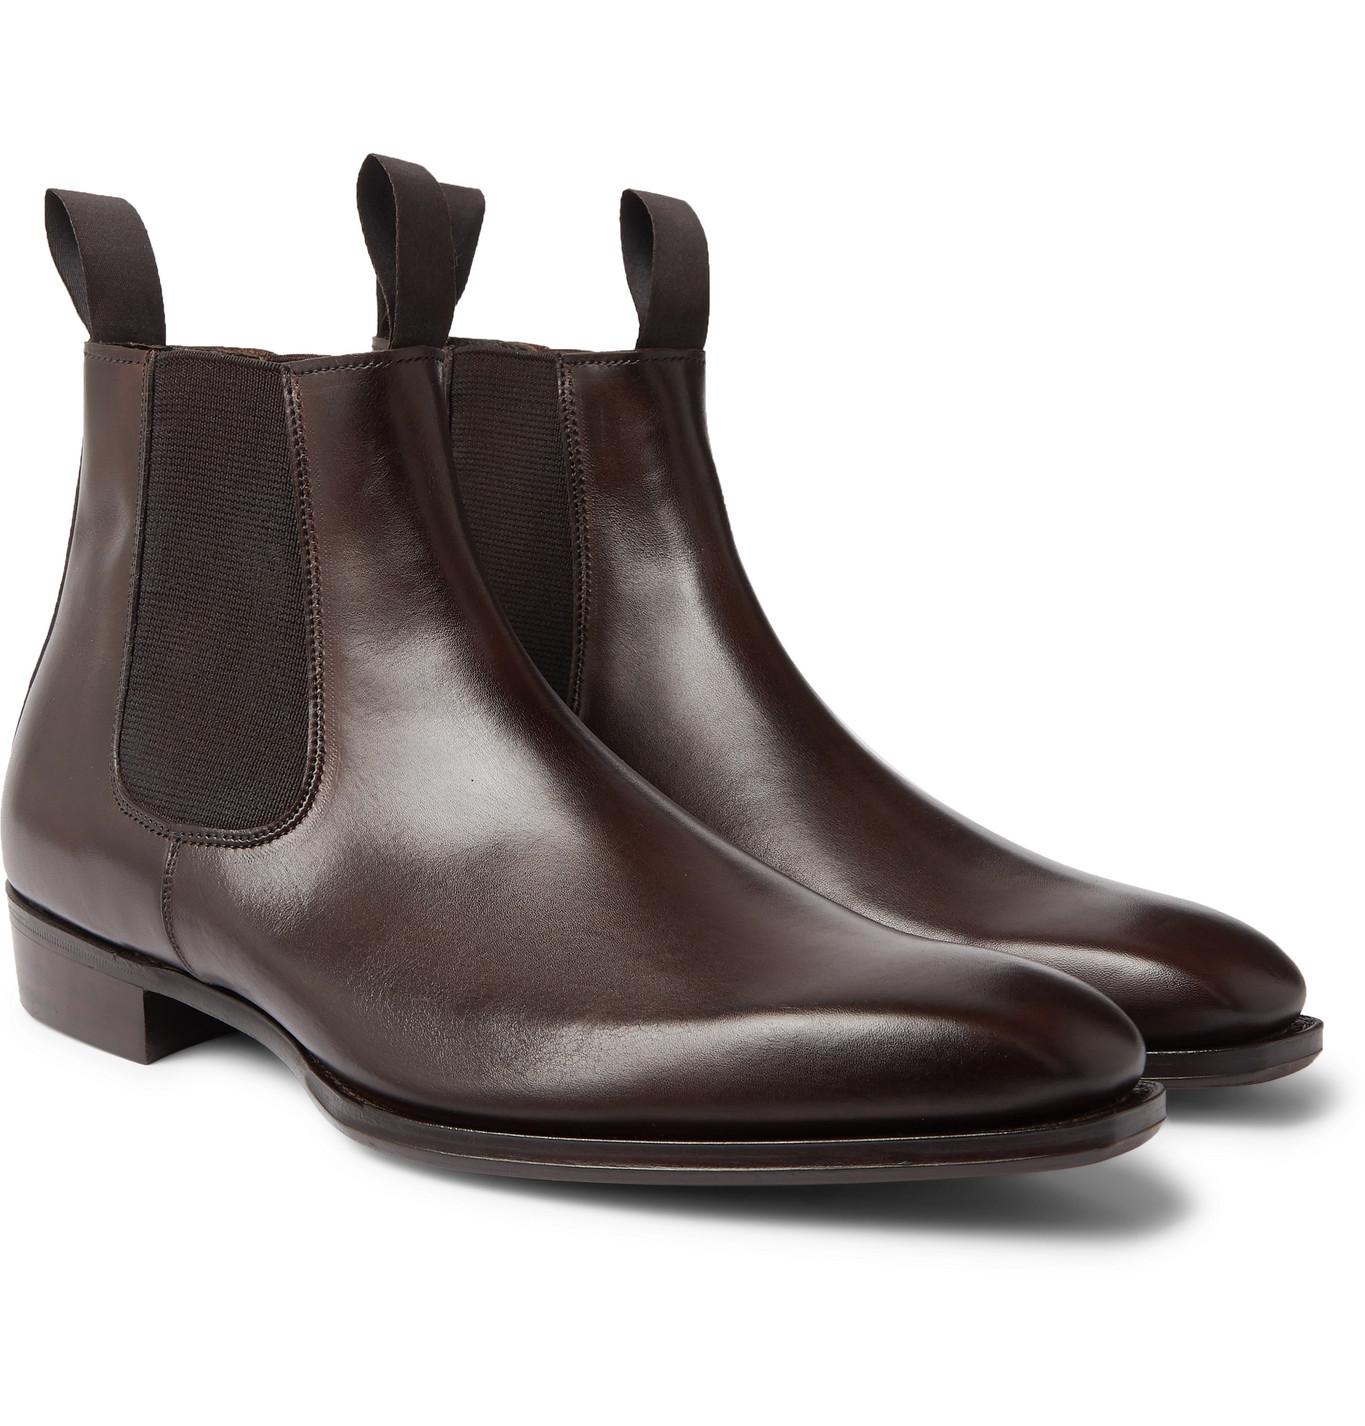 George Cleverley Robert Leather Chelsea Boots in Brown for Men - Lyst